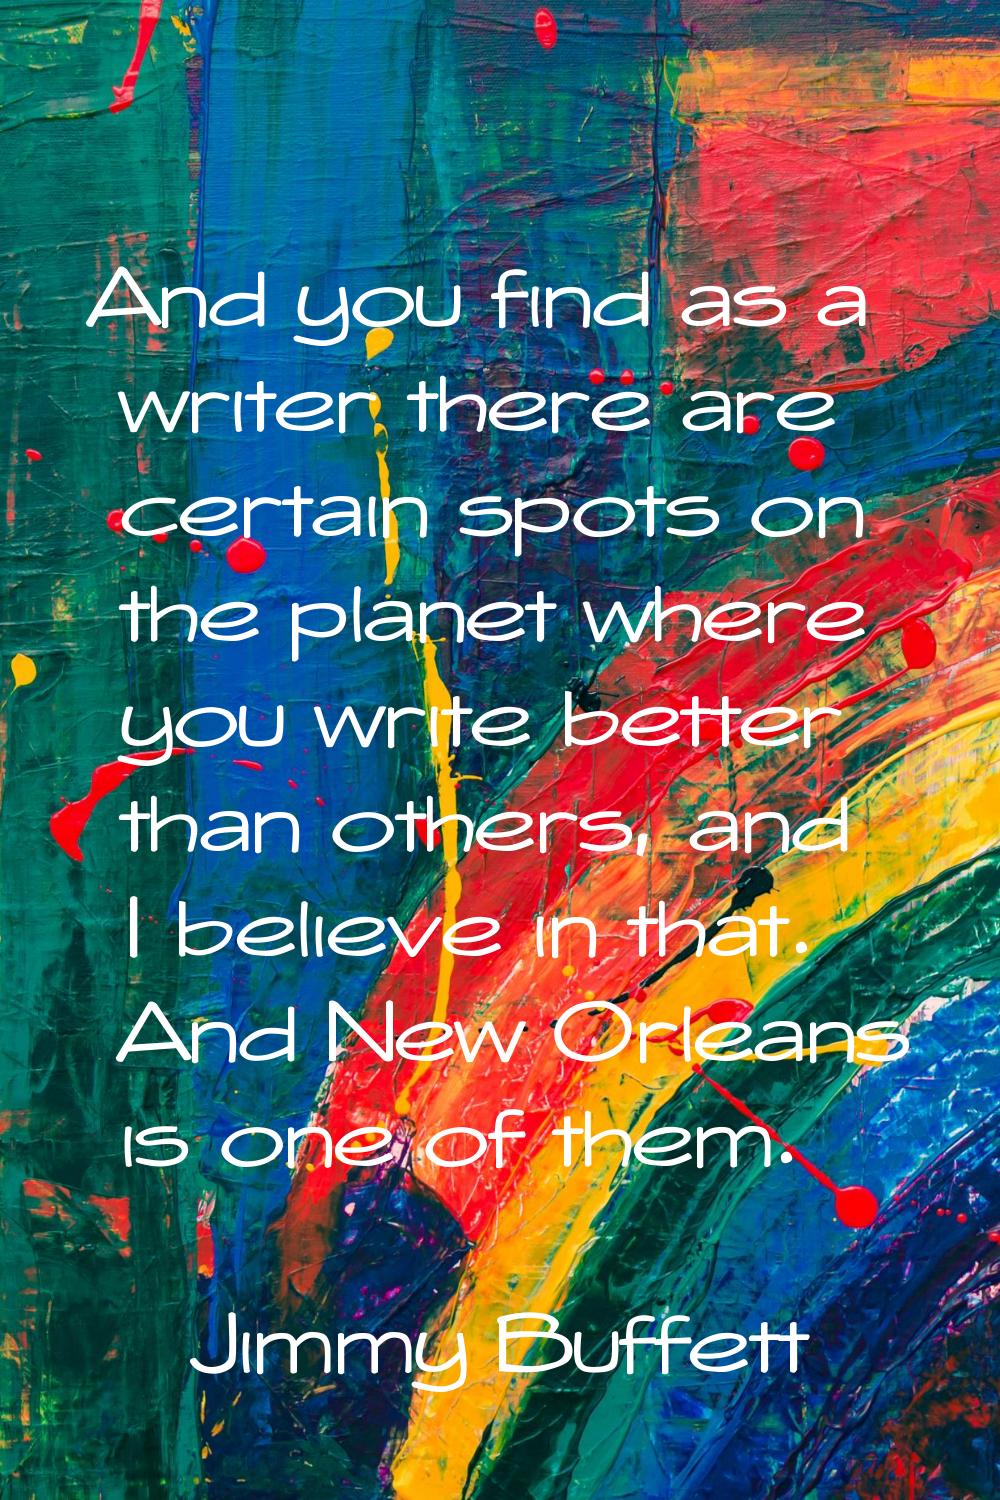 And you find as a writer there are certain spots on the planet where you write better than others, 